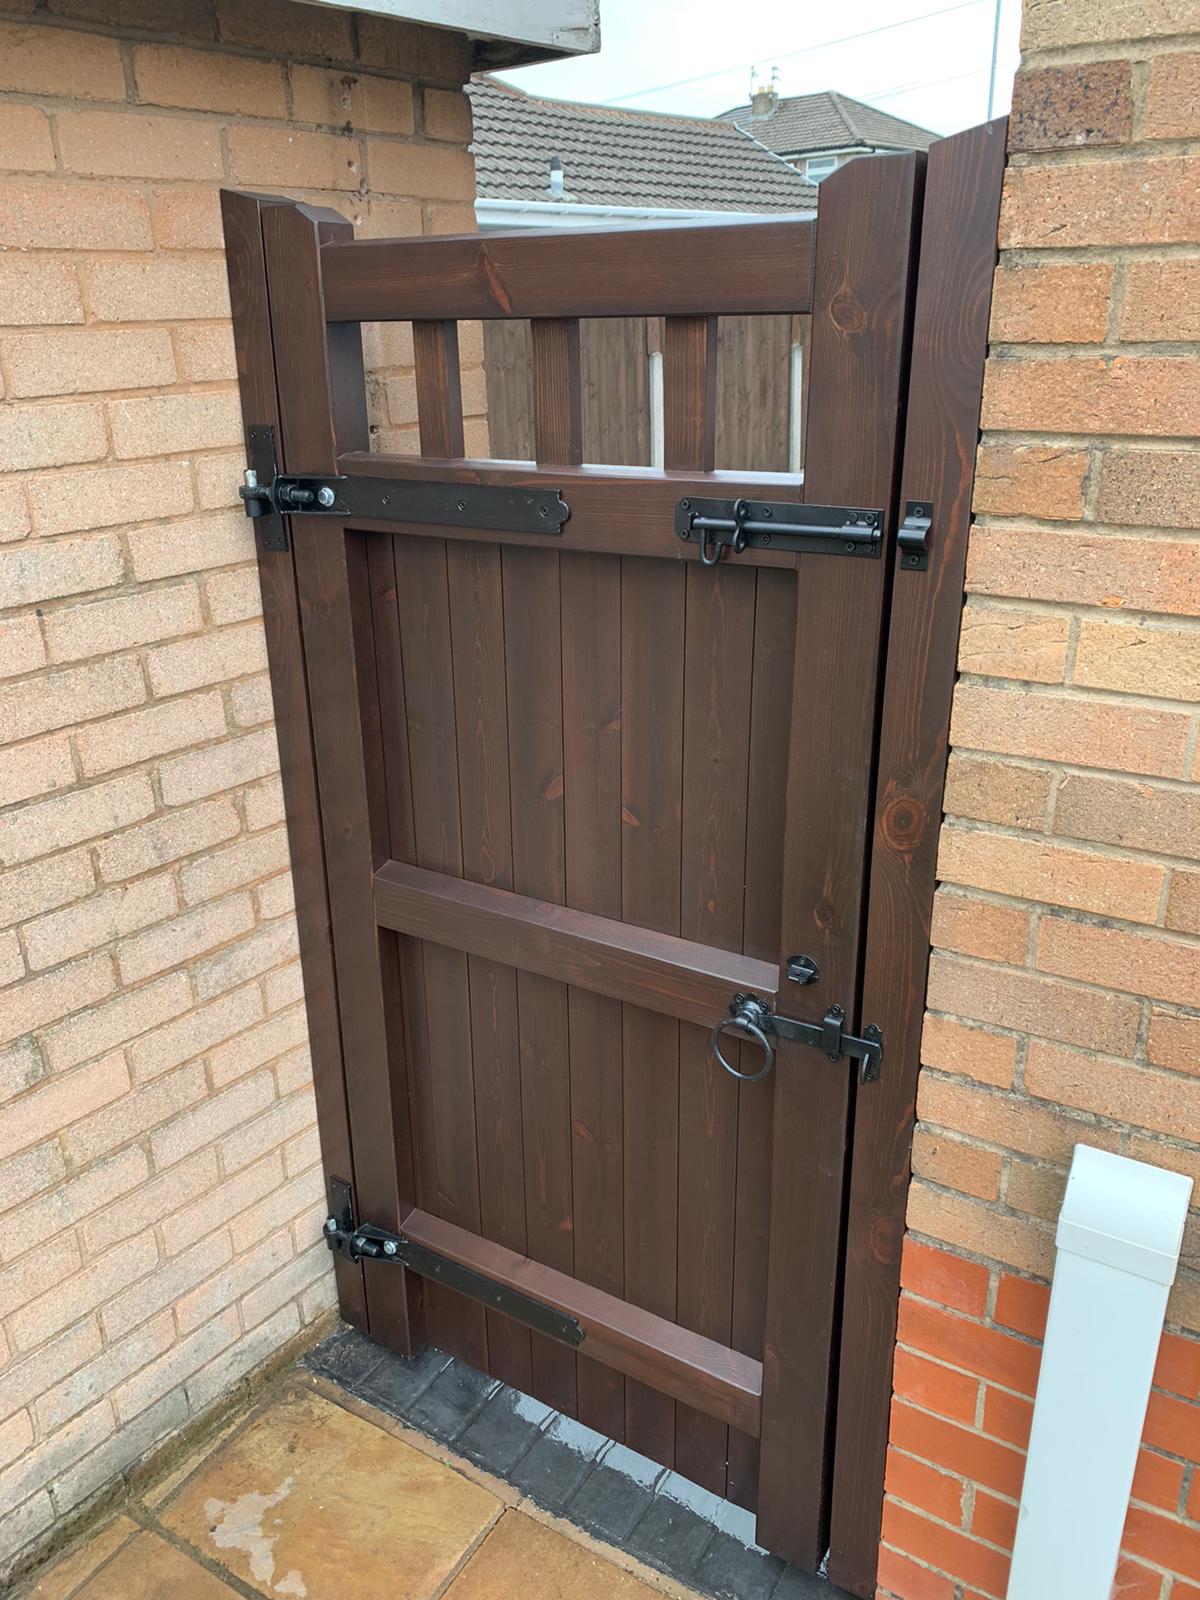 Softwood Side Gate - Cheshire Design - Red Rosewood Stain - Single Gate - Rear